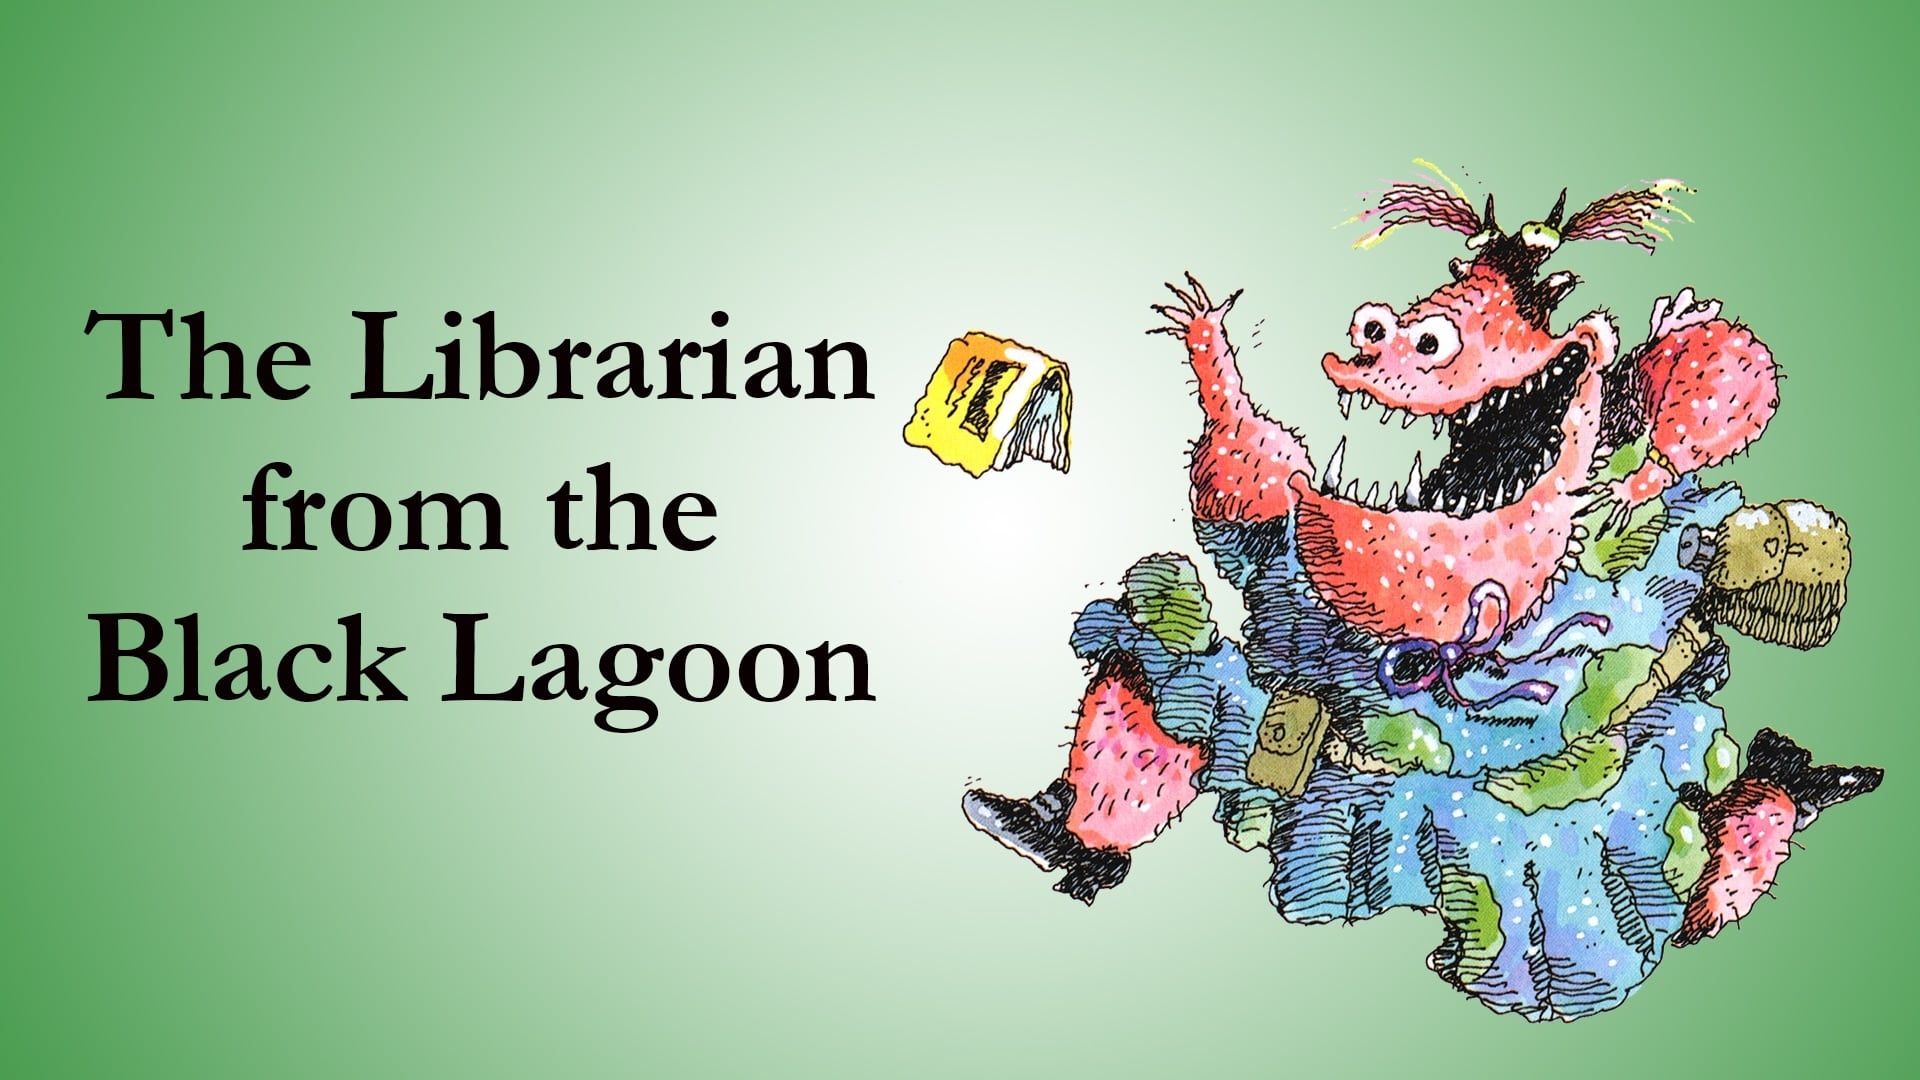 The Librarian from the Black Lagoon background